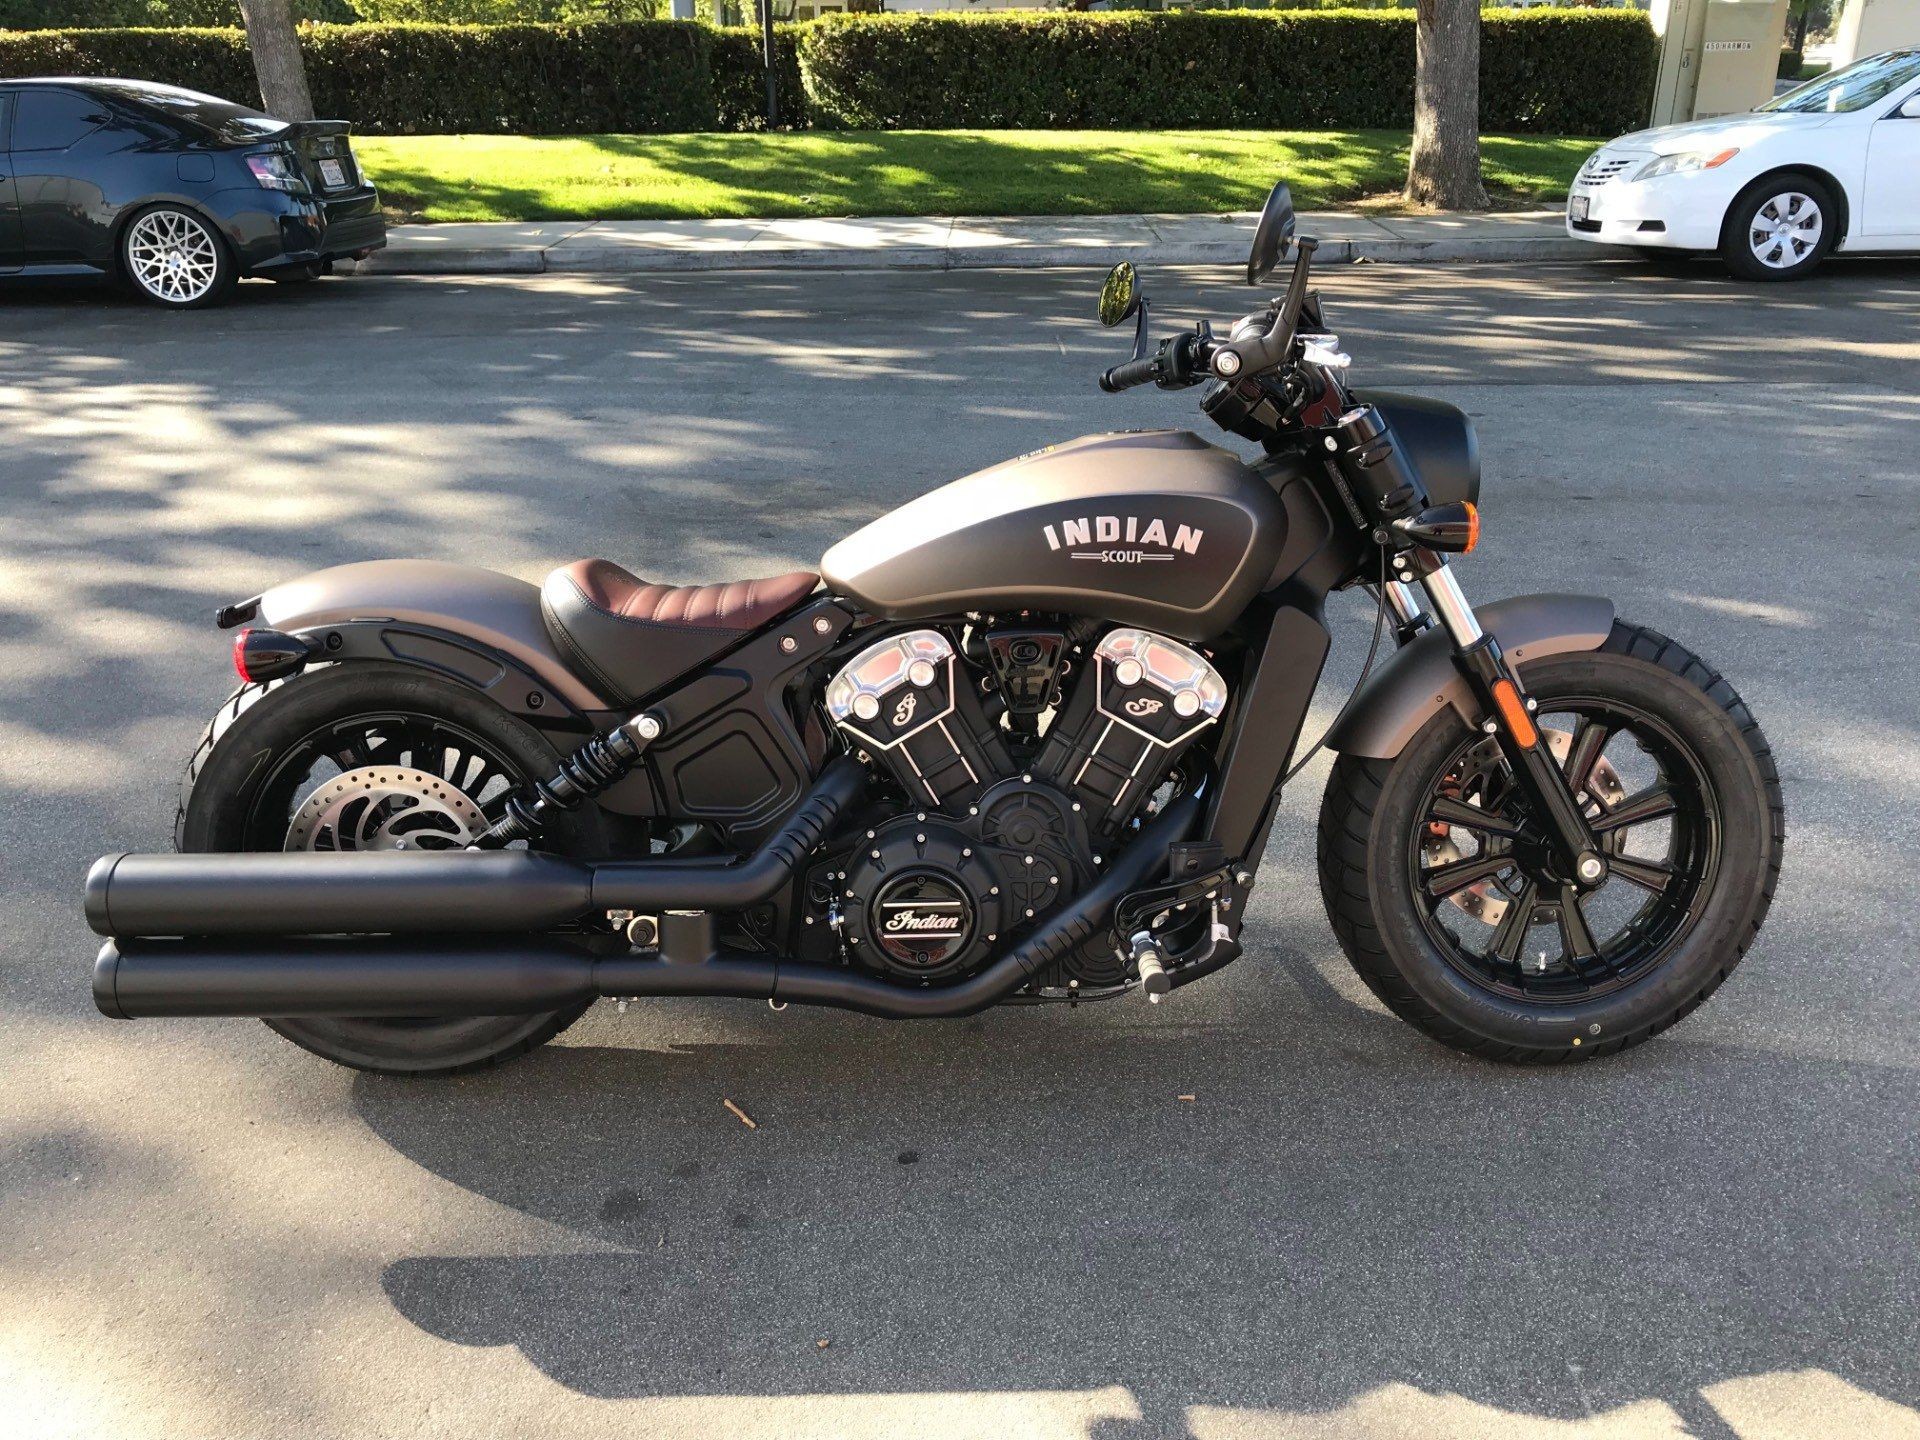 1920x1440 Image result for 2018 Indian Scout Bobber bronze smoke